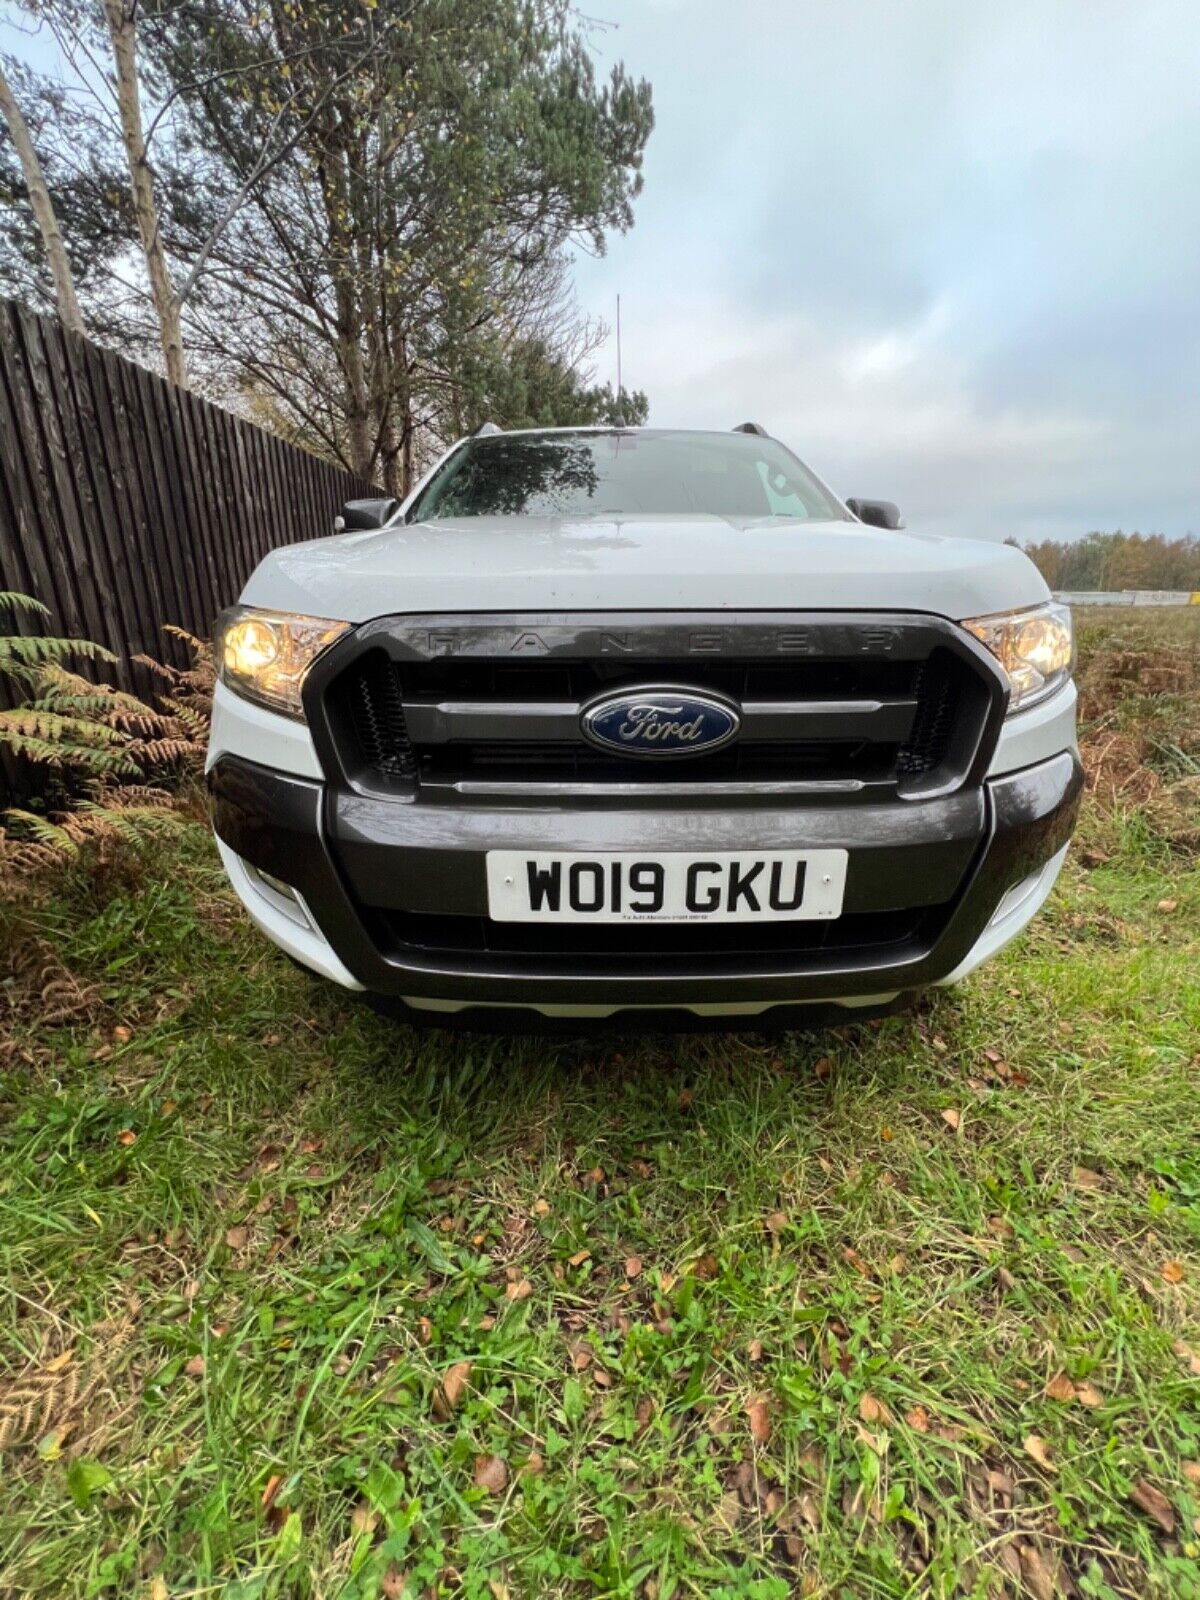 Bid on 2019 MANUAL 6 SPEED FORD RANGER WILDTRAK 3.2 2019 MANUAL EURO6- Buy &amp; Sell on Auction with EAMA Group